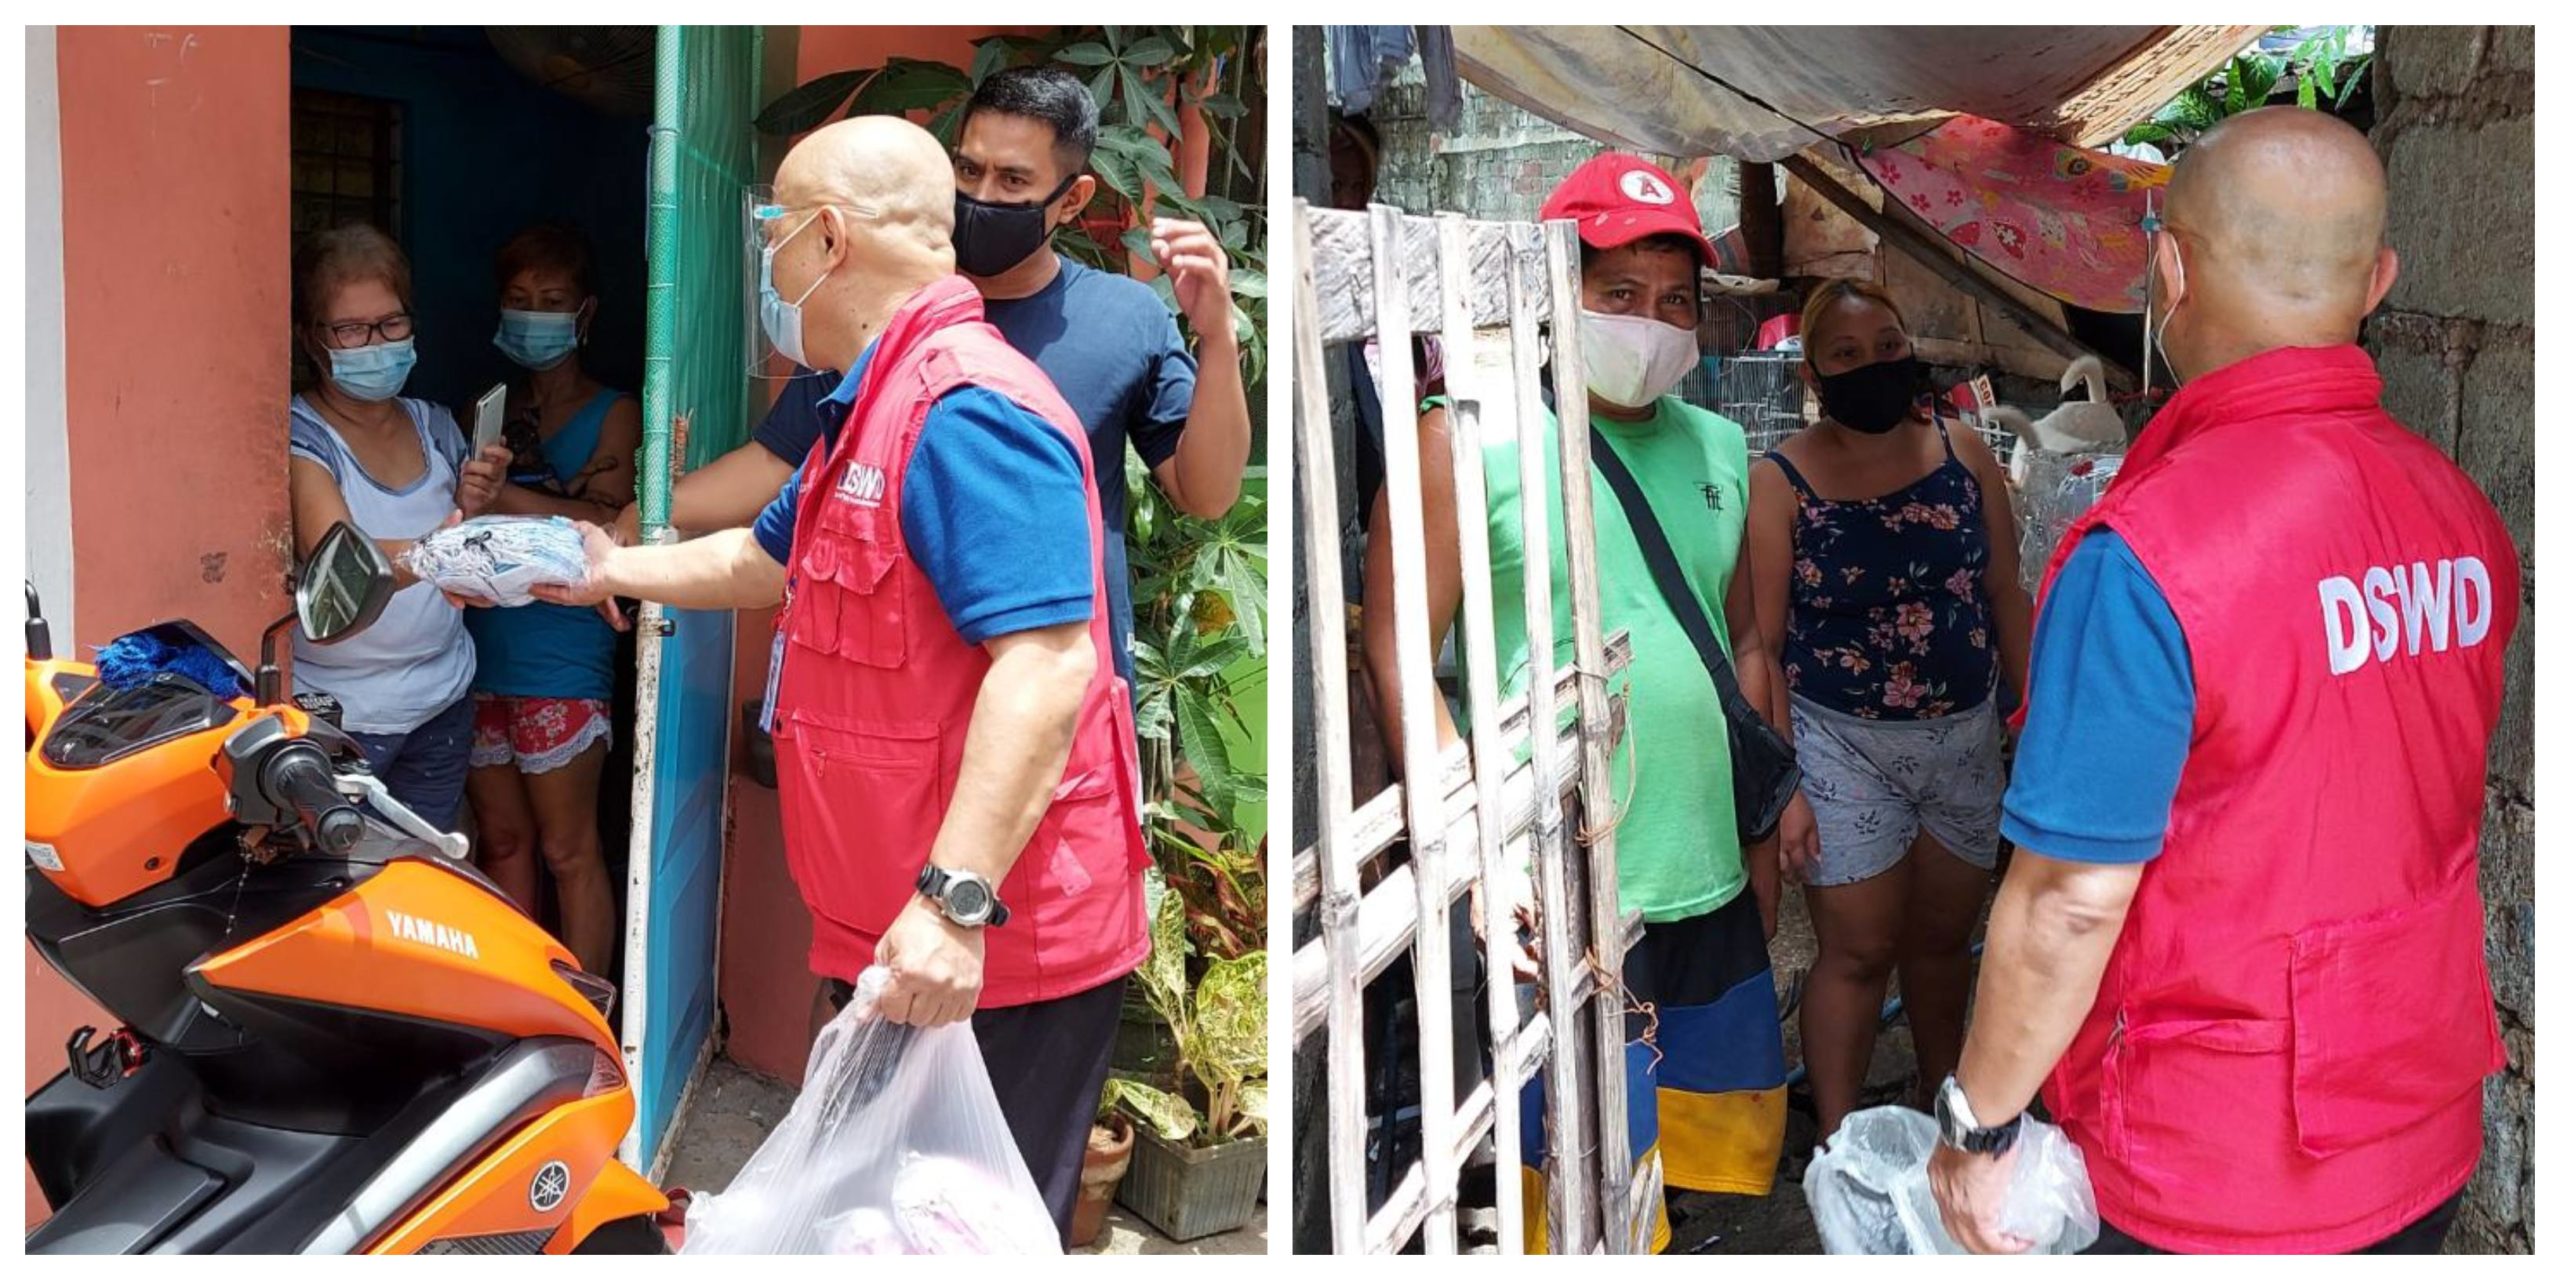 A government official gives relief goods to residents. Photo: Department of Social Work and Development/FB